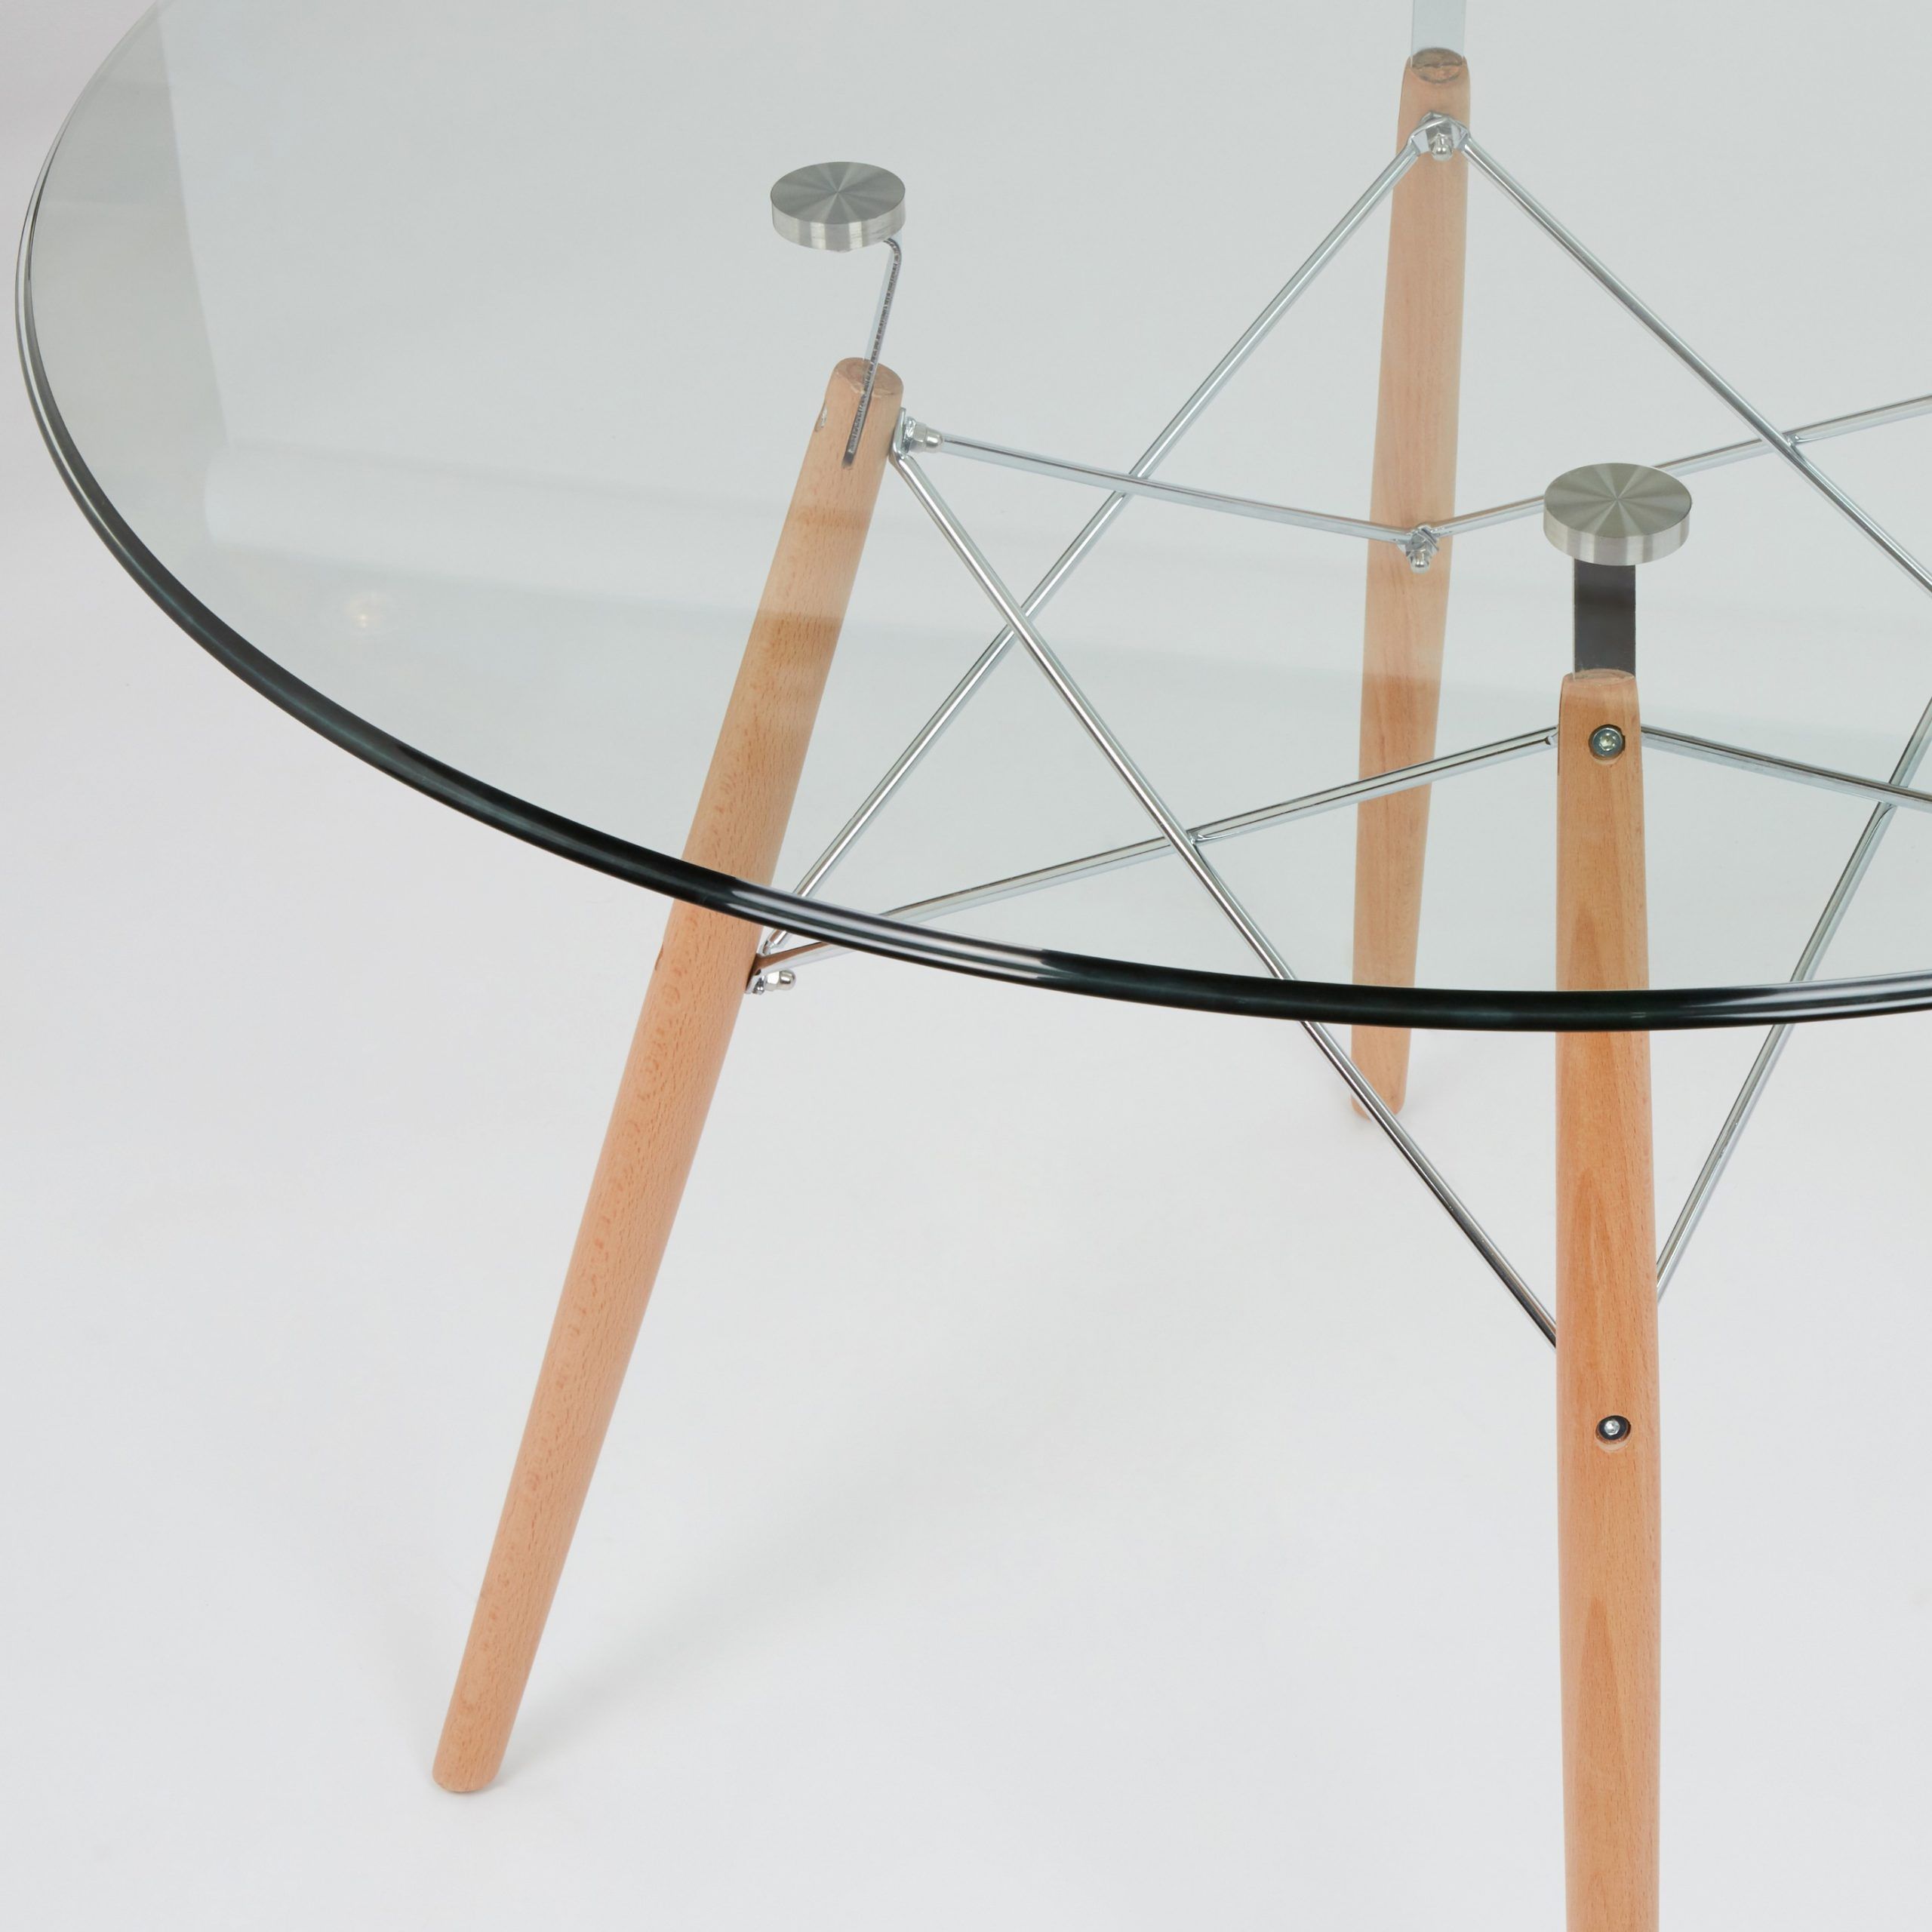 Eames Style Dining Tables With Chromed Leg And Tempered Glass Top In Most Recent Dining Glass Table With Beechwood Legs (size: 100cm (Photo 12 of 25)